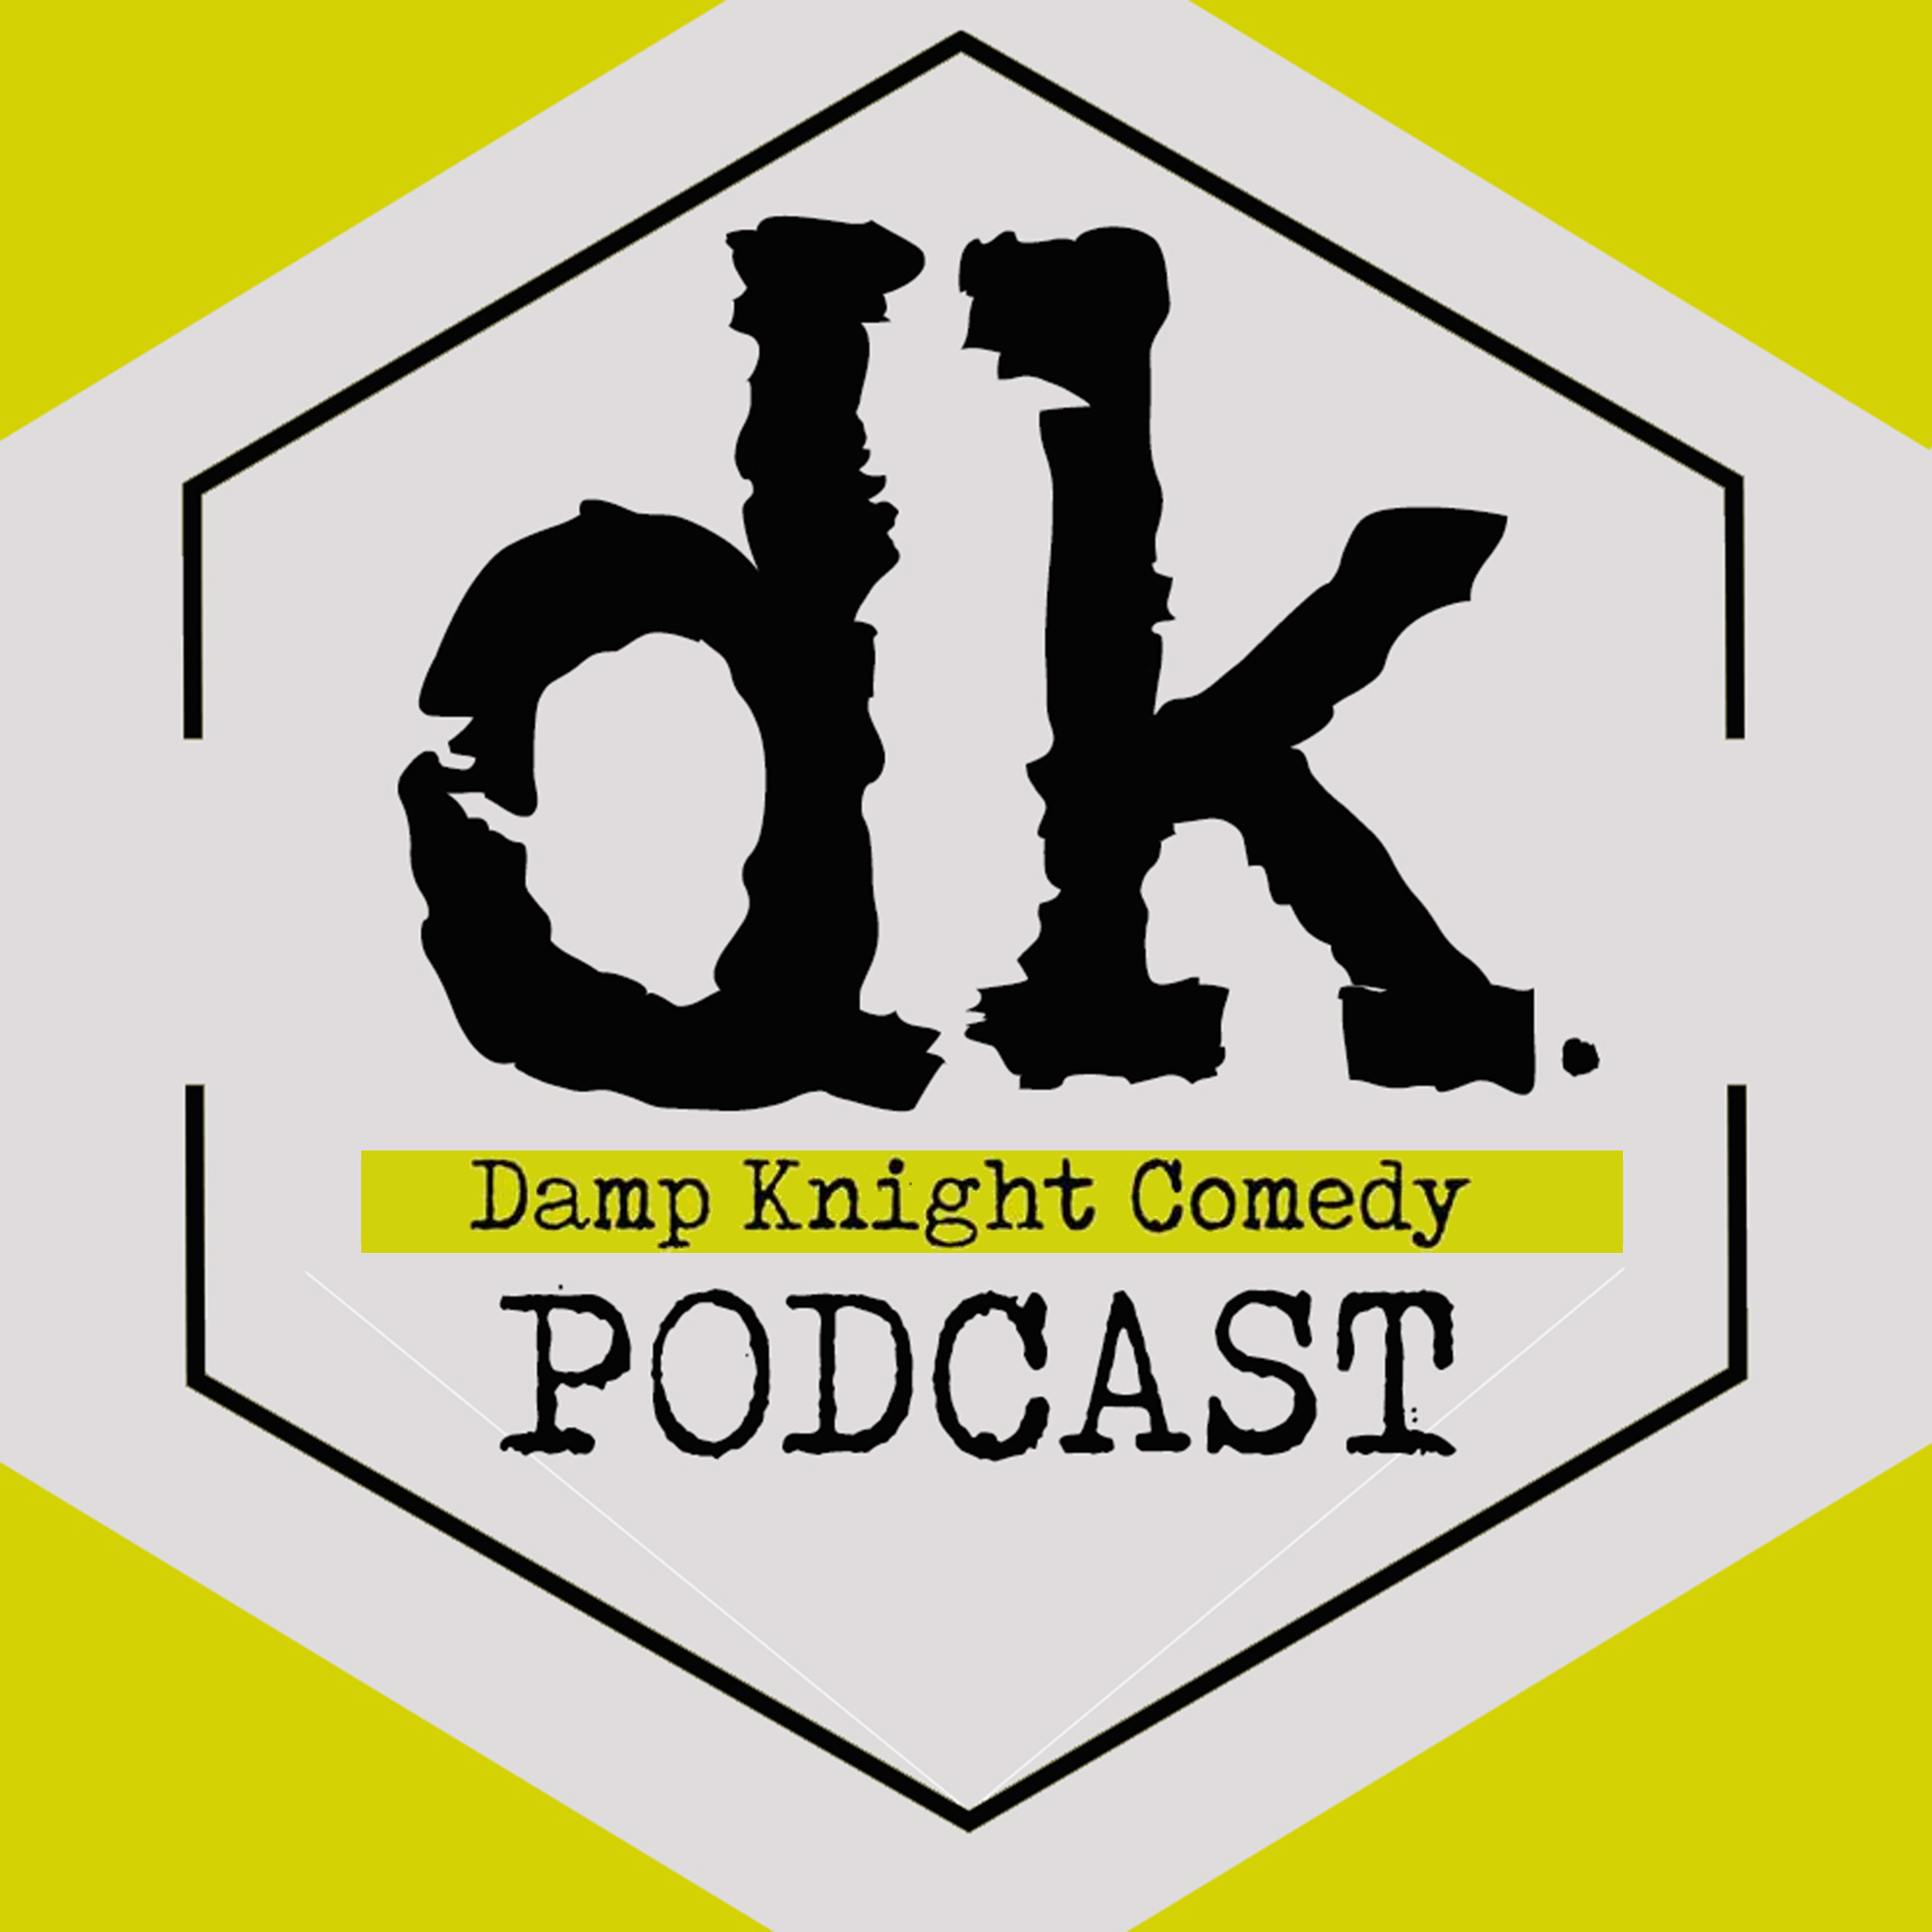 DK Podcast EP 56 - The Death of David Simpson